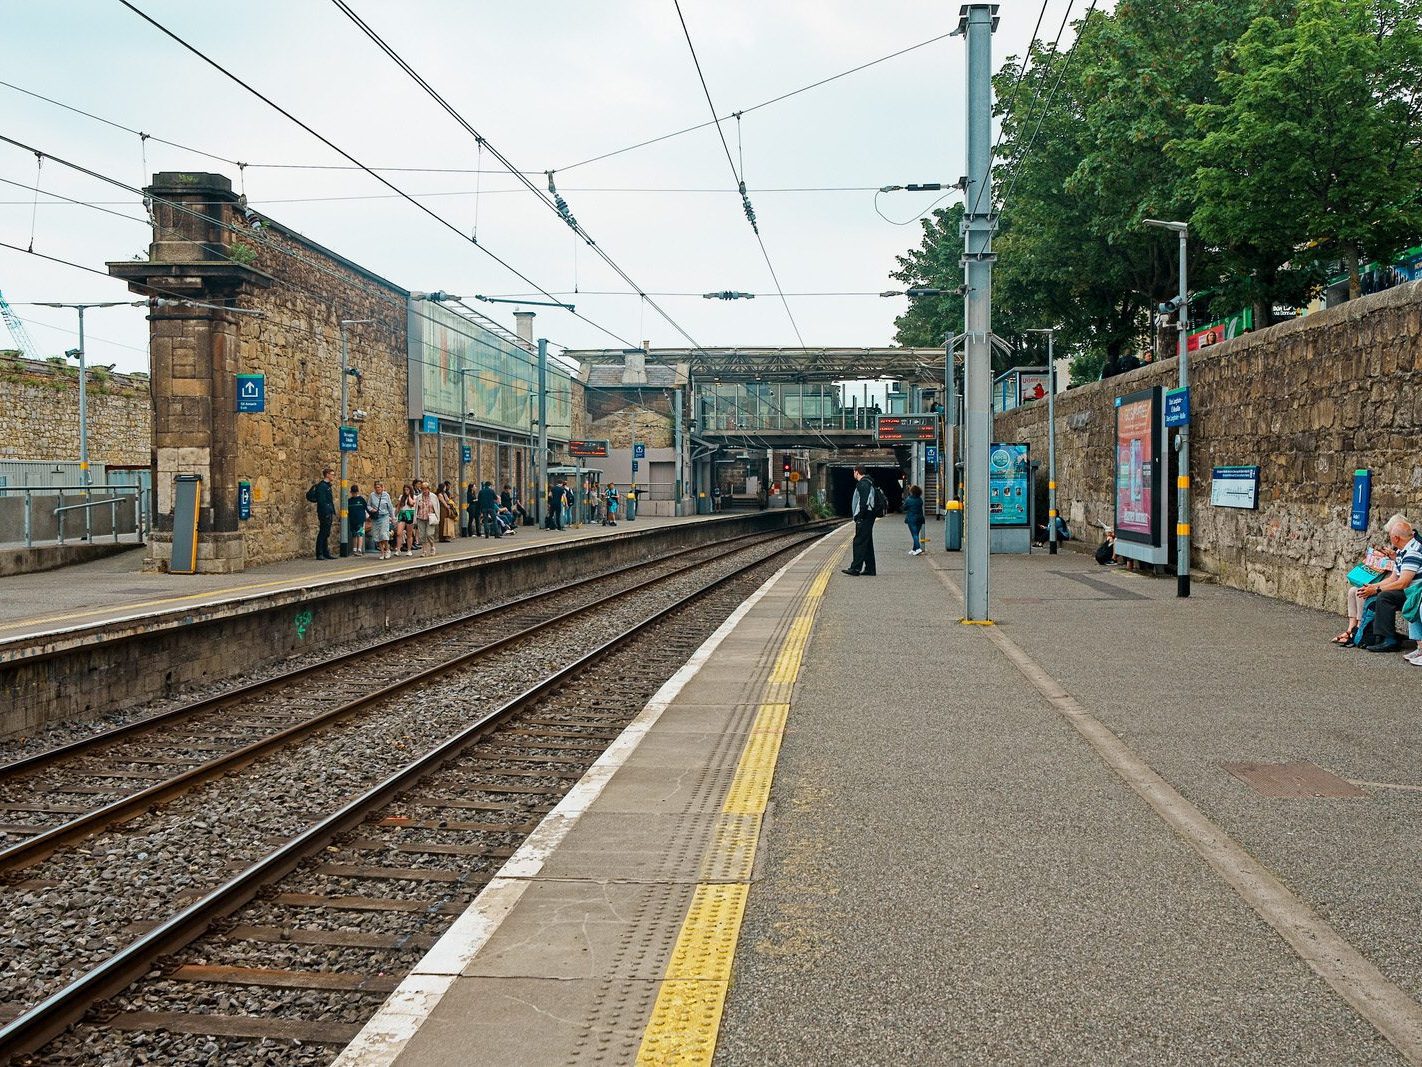 DID YOU KNOW THAT IT IS MALLIN STATION [THE TRAIN STATION IN DUN LAOGHAIRE] 006